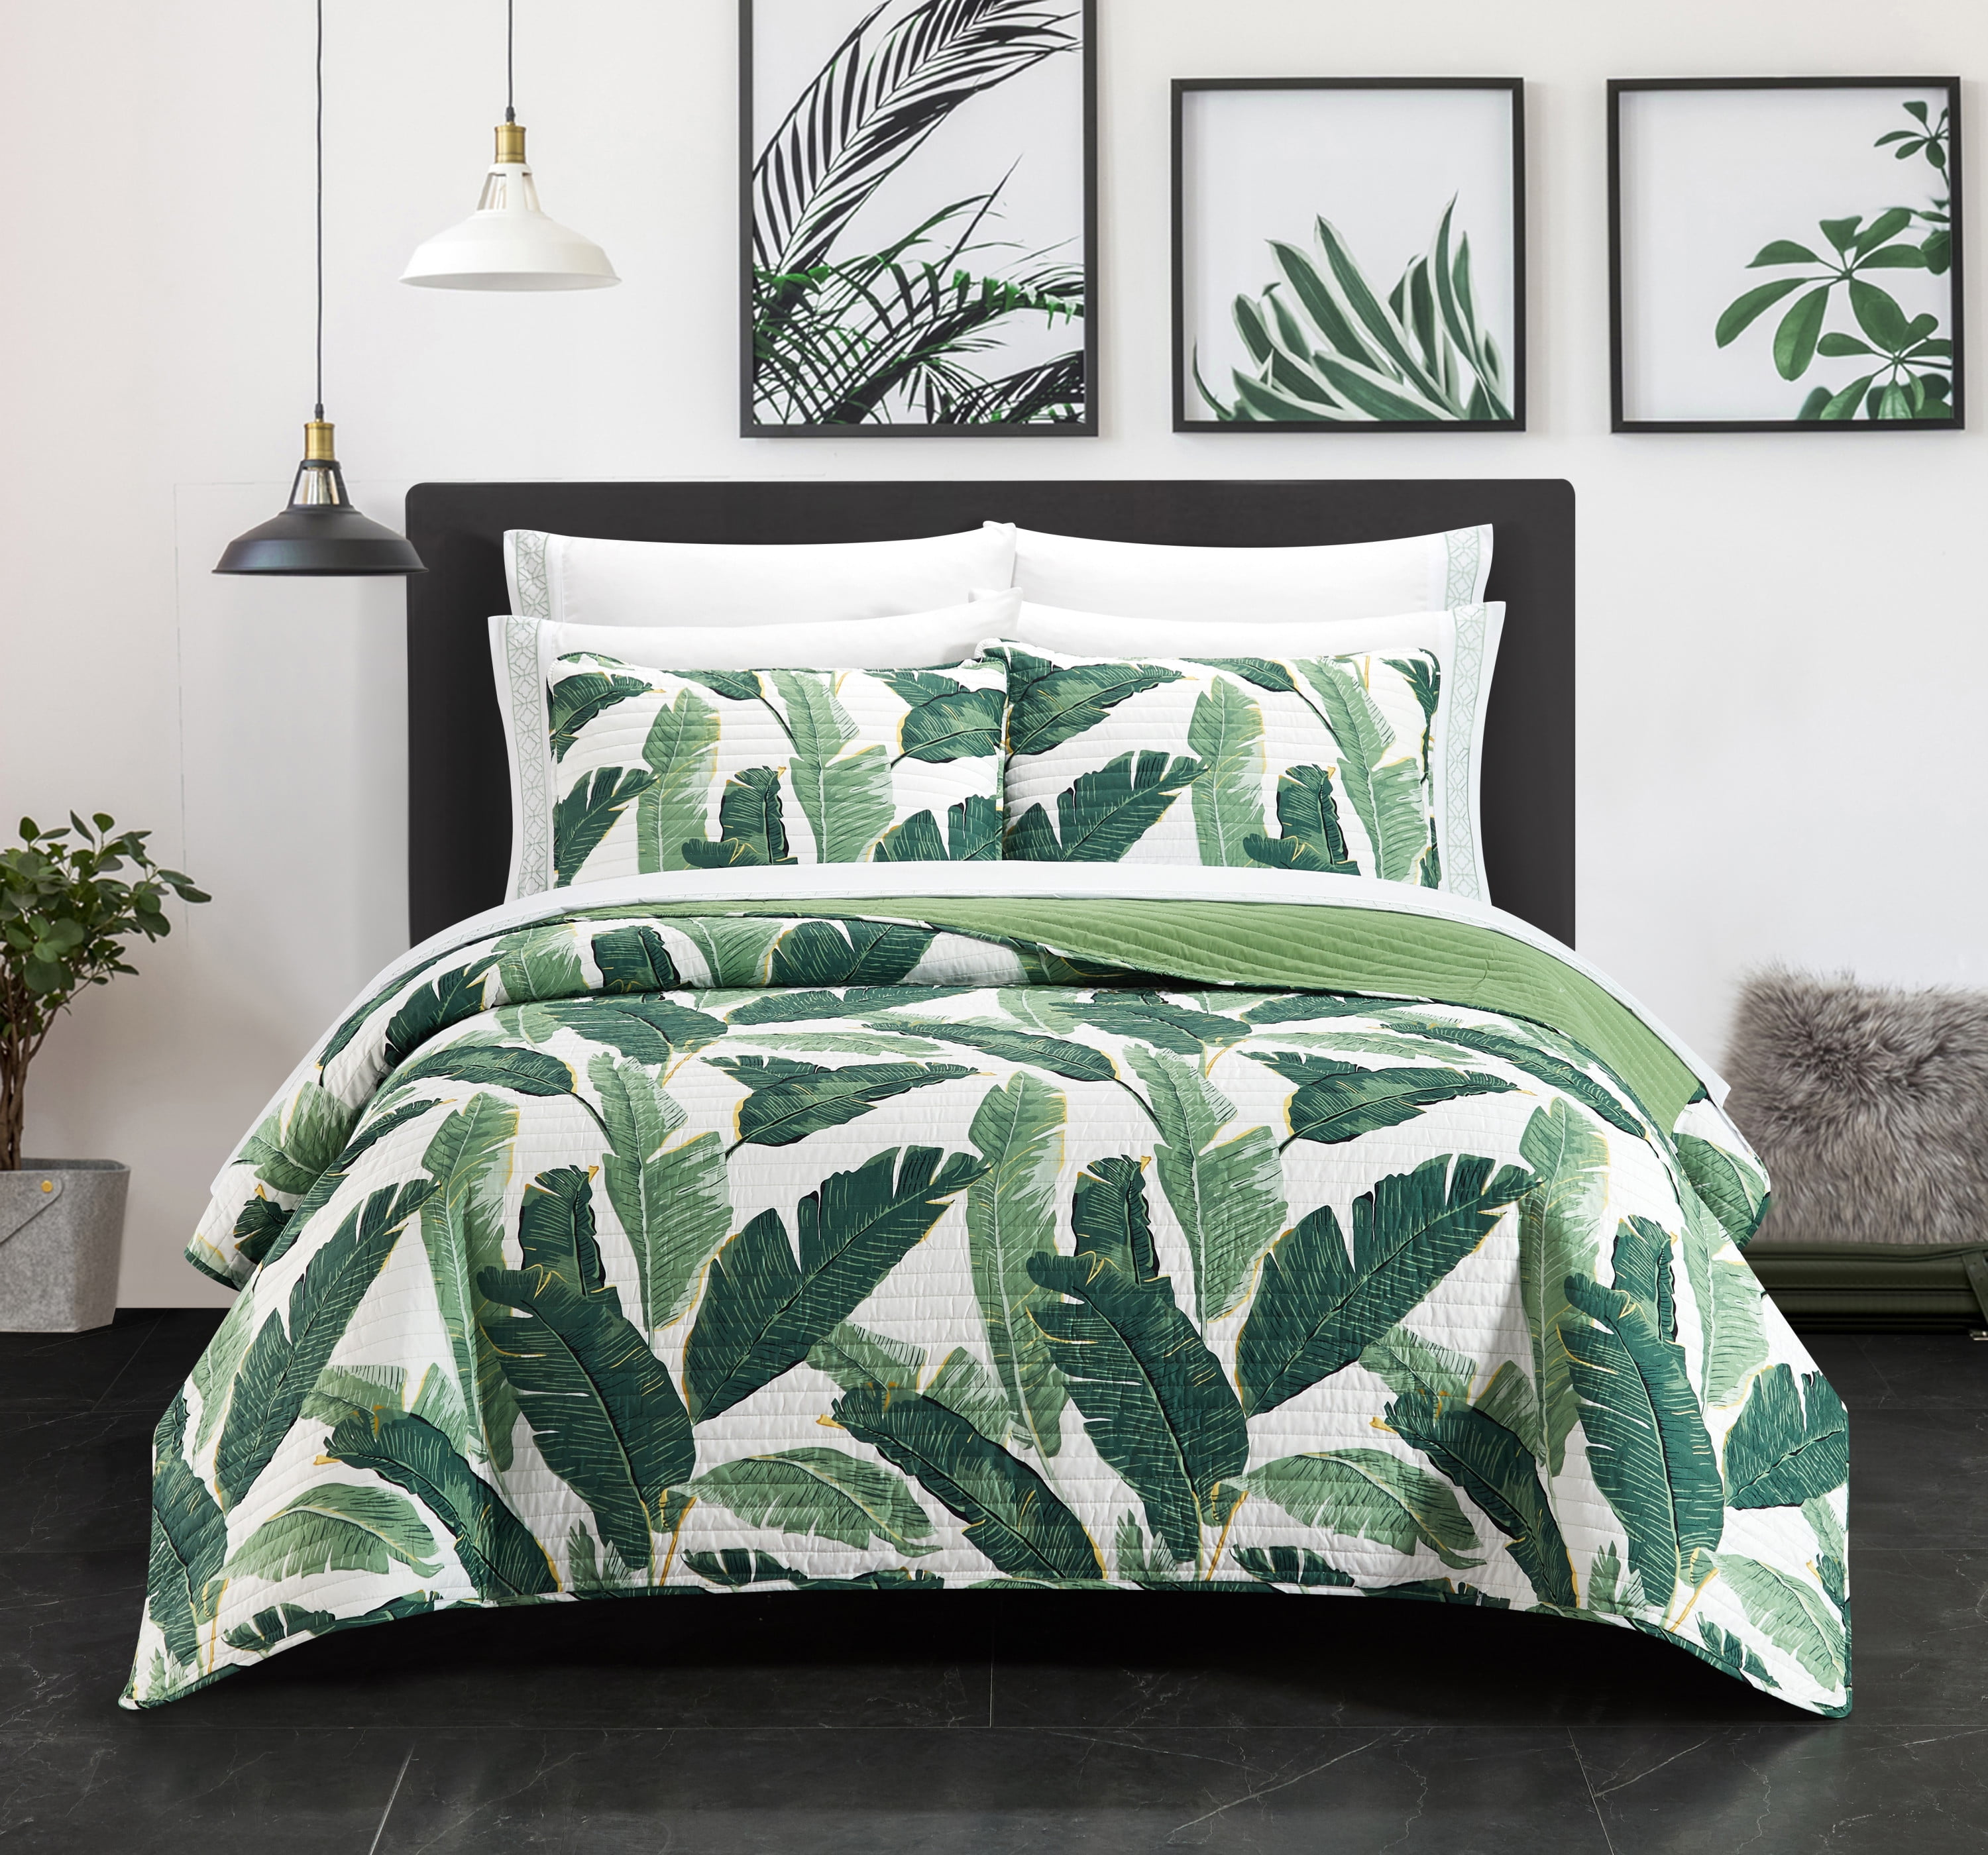 Borrego Palm 9 Piece Quilt Set, King Size Bedspread With Palm Trees